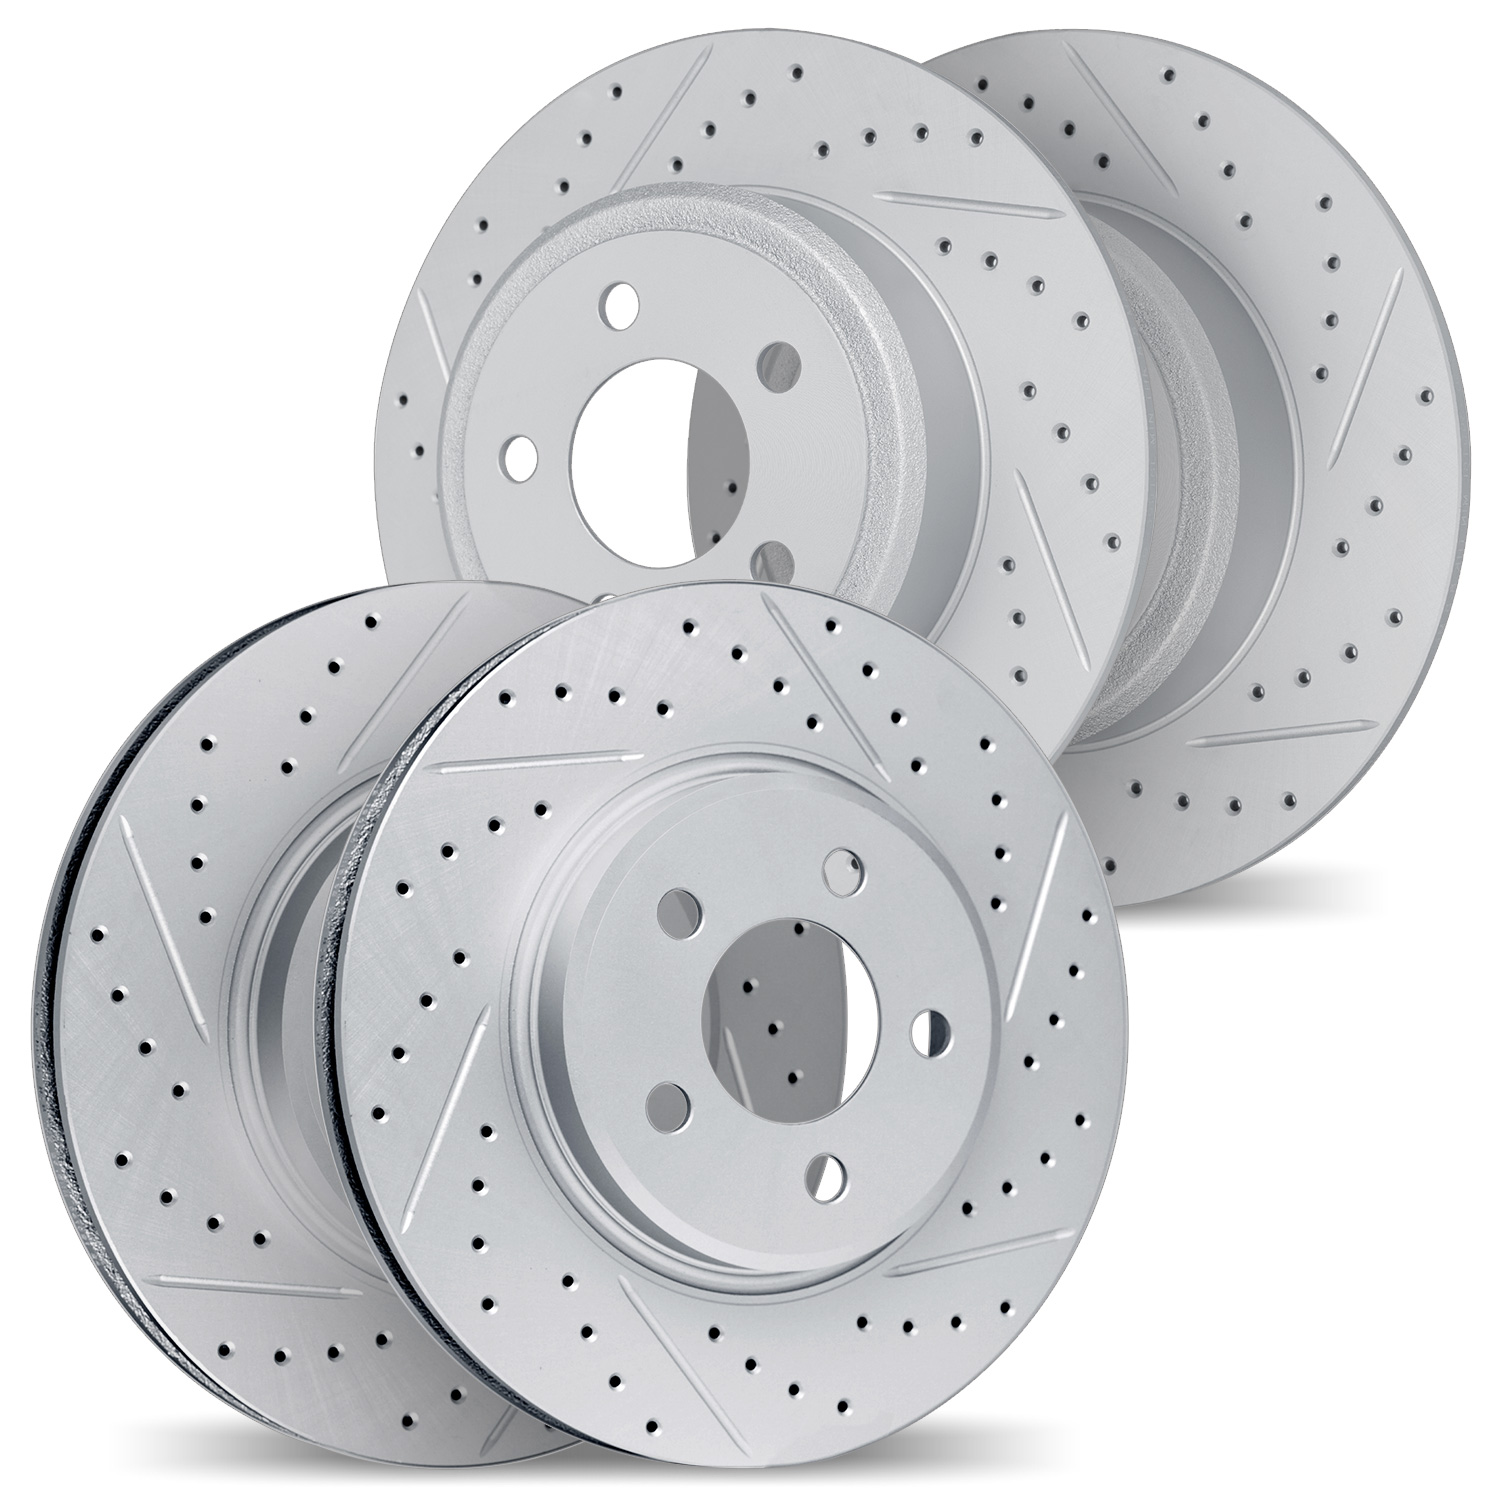 2004-67065 Geoperformance Drilled/Slotted Brake Rotors, 2013-2019 Infiniti/Nissan, Position: Front and Rear